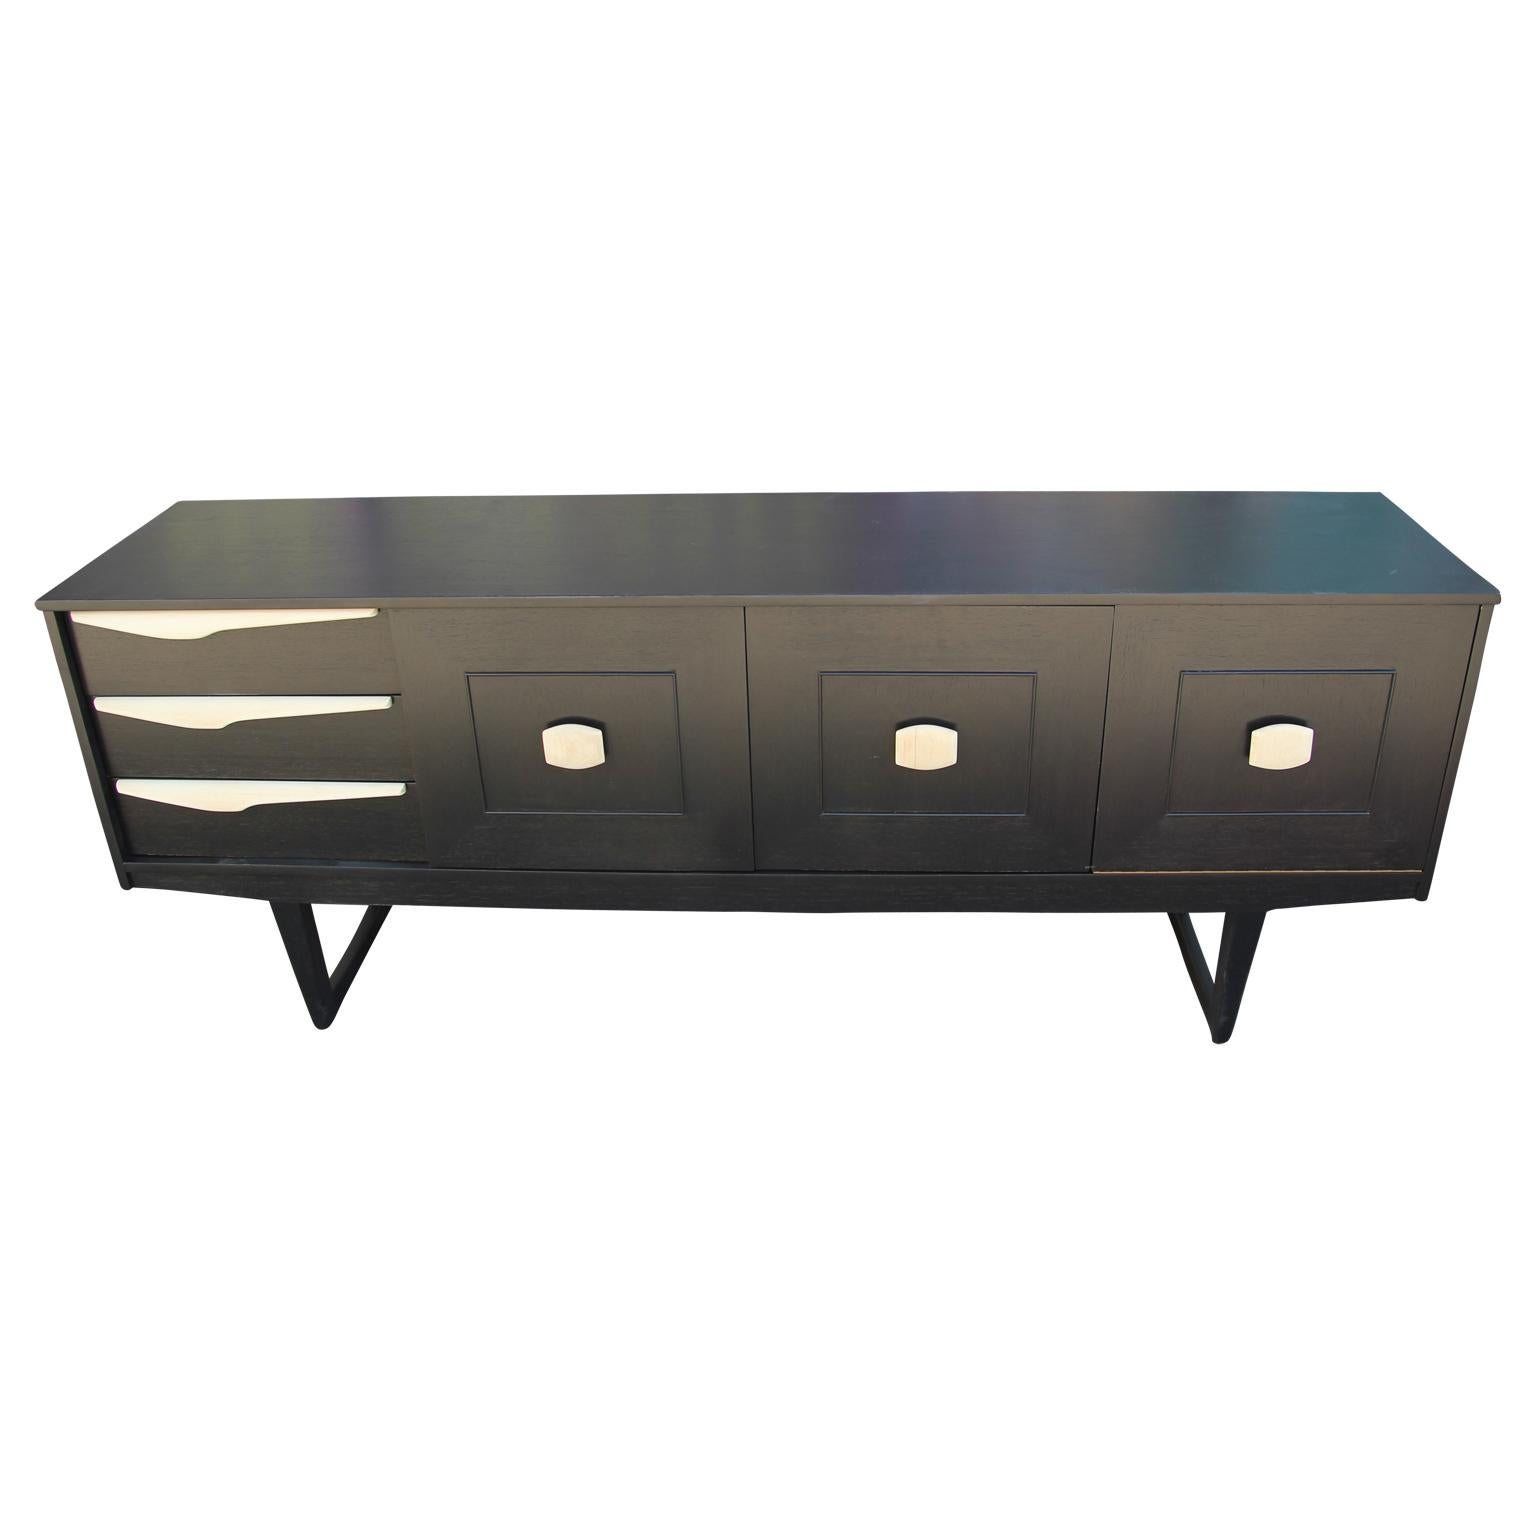 Wonderful modern custom sideboard or credenza newly restored with a black finish and wooden handles. This sideboard has three drawers, a larger middle cabinet, and another drop front cabinet with an interior shelf.